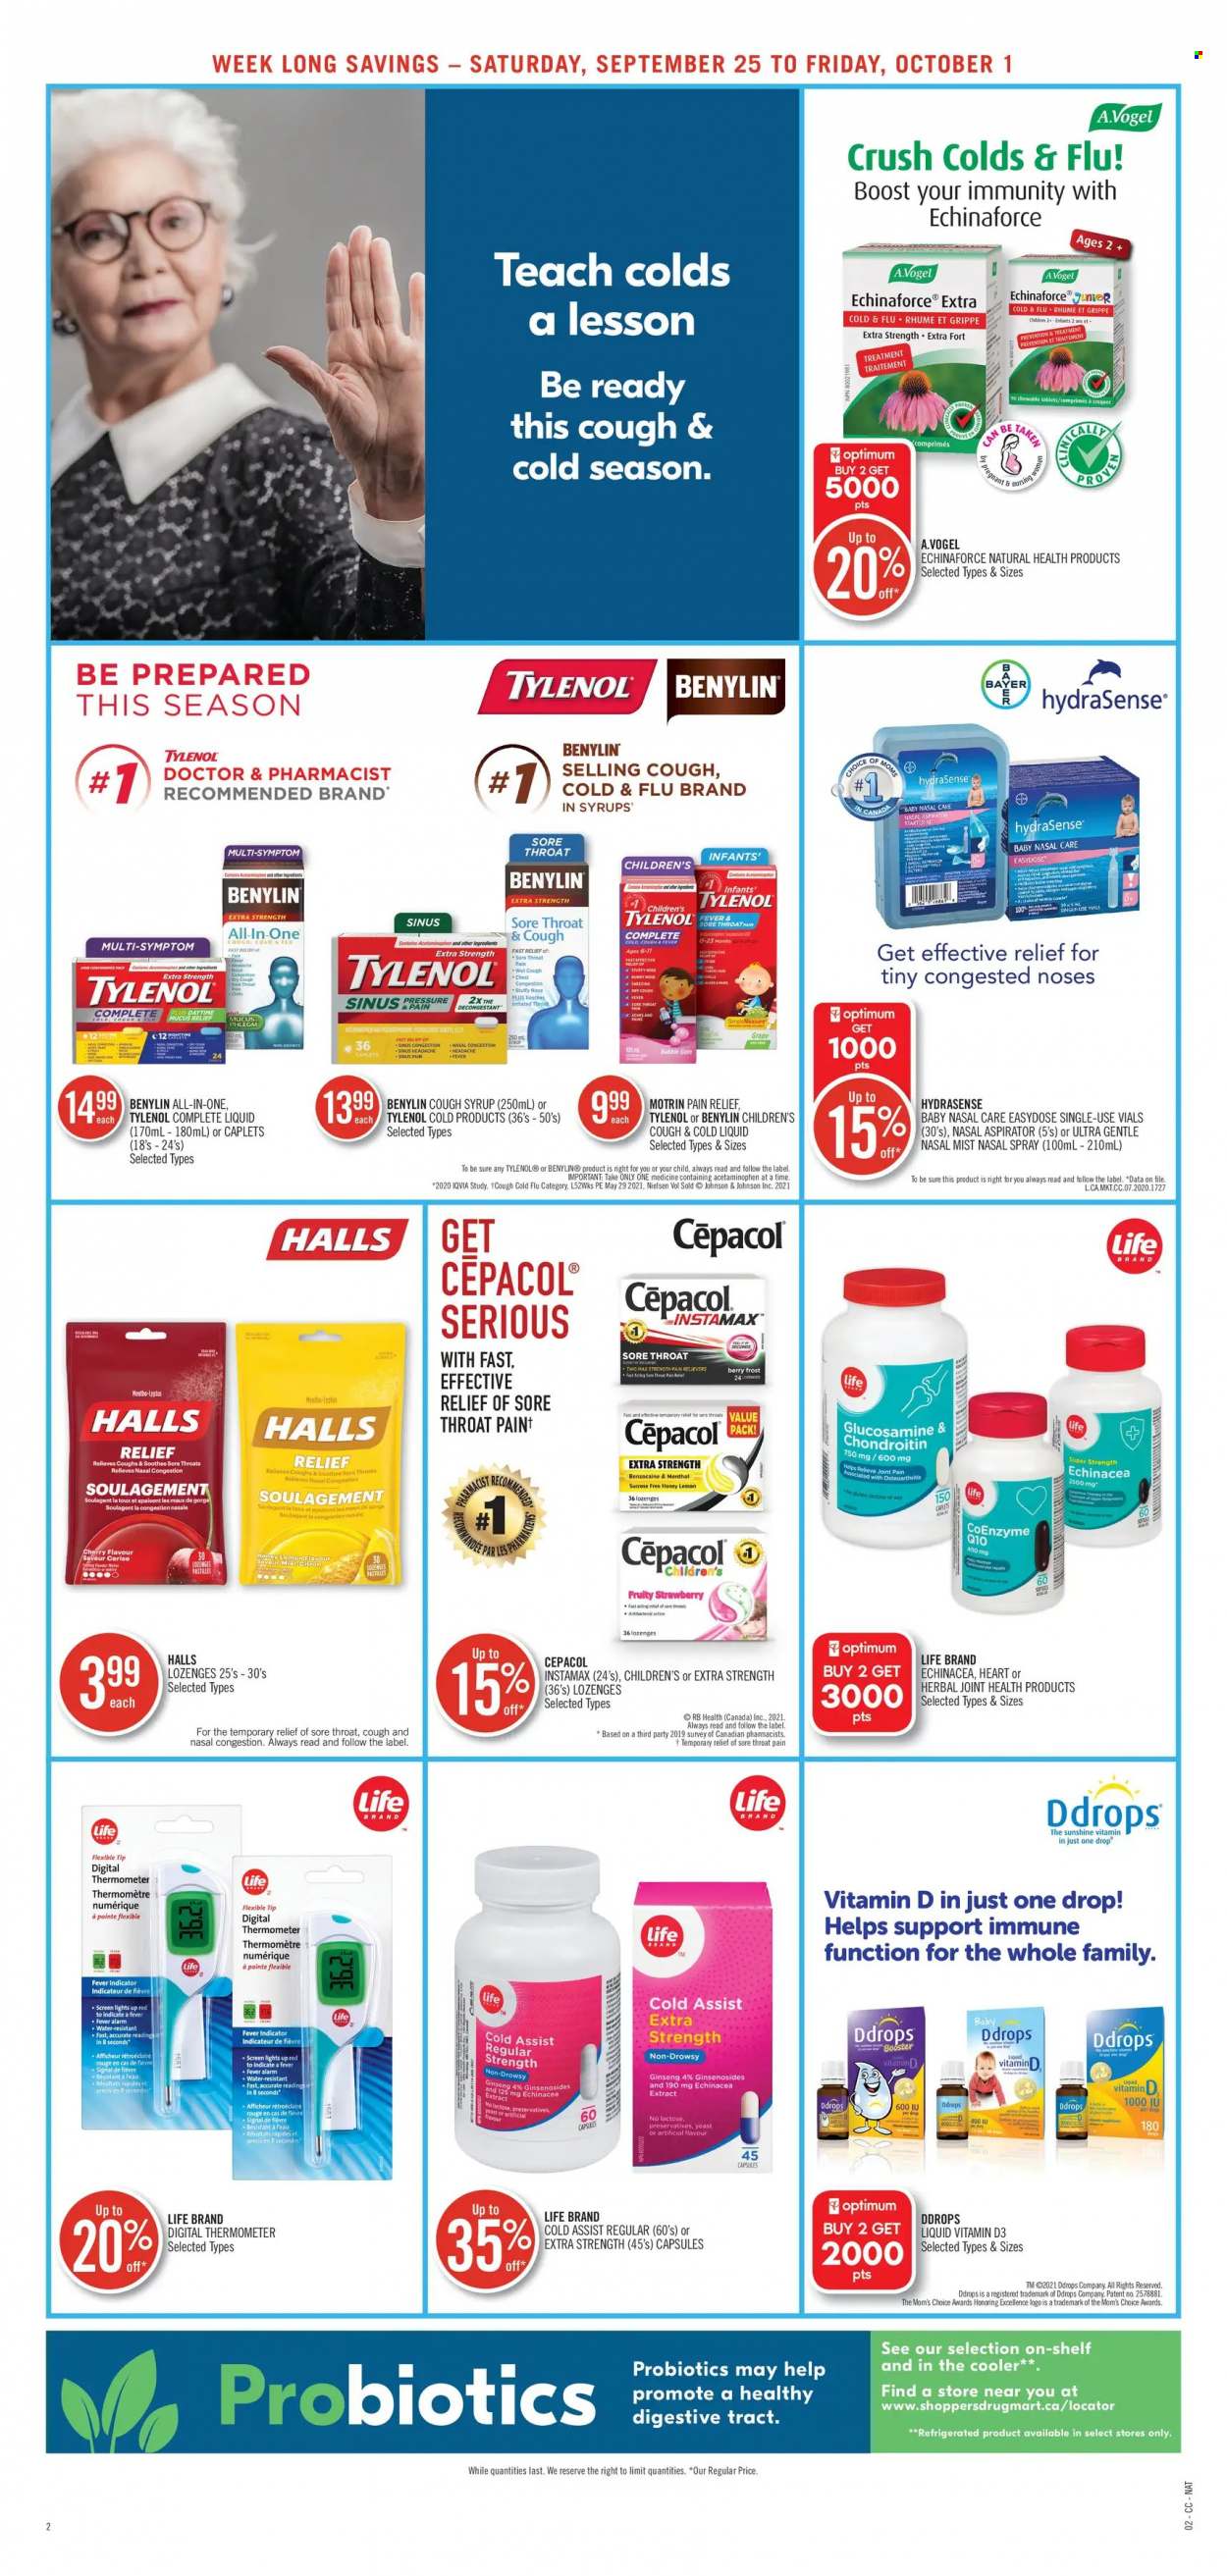 thumbnail - Shoppers Drug Mart Flyer - September 25, 2021 - October 01, 2021 - Sales products - Halls, bubblegum, pastilles, honey, syrup, Boost, Johnson's, Signal, Sure, pain relief, Cold & Flu, glucosamine, Tylenol, probiotics, ginseng, Echinaforce, vitamin D3, Bayer, Benylin, nasal spray, Motrin, thermometer. Page 5.